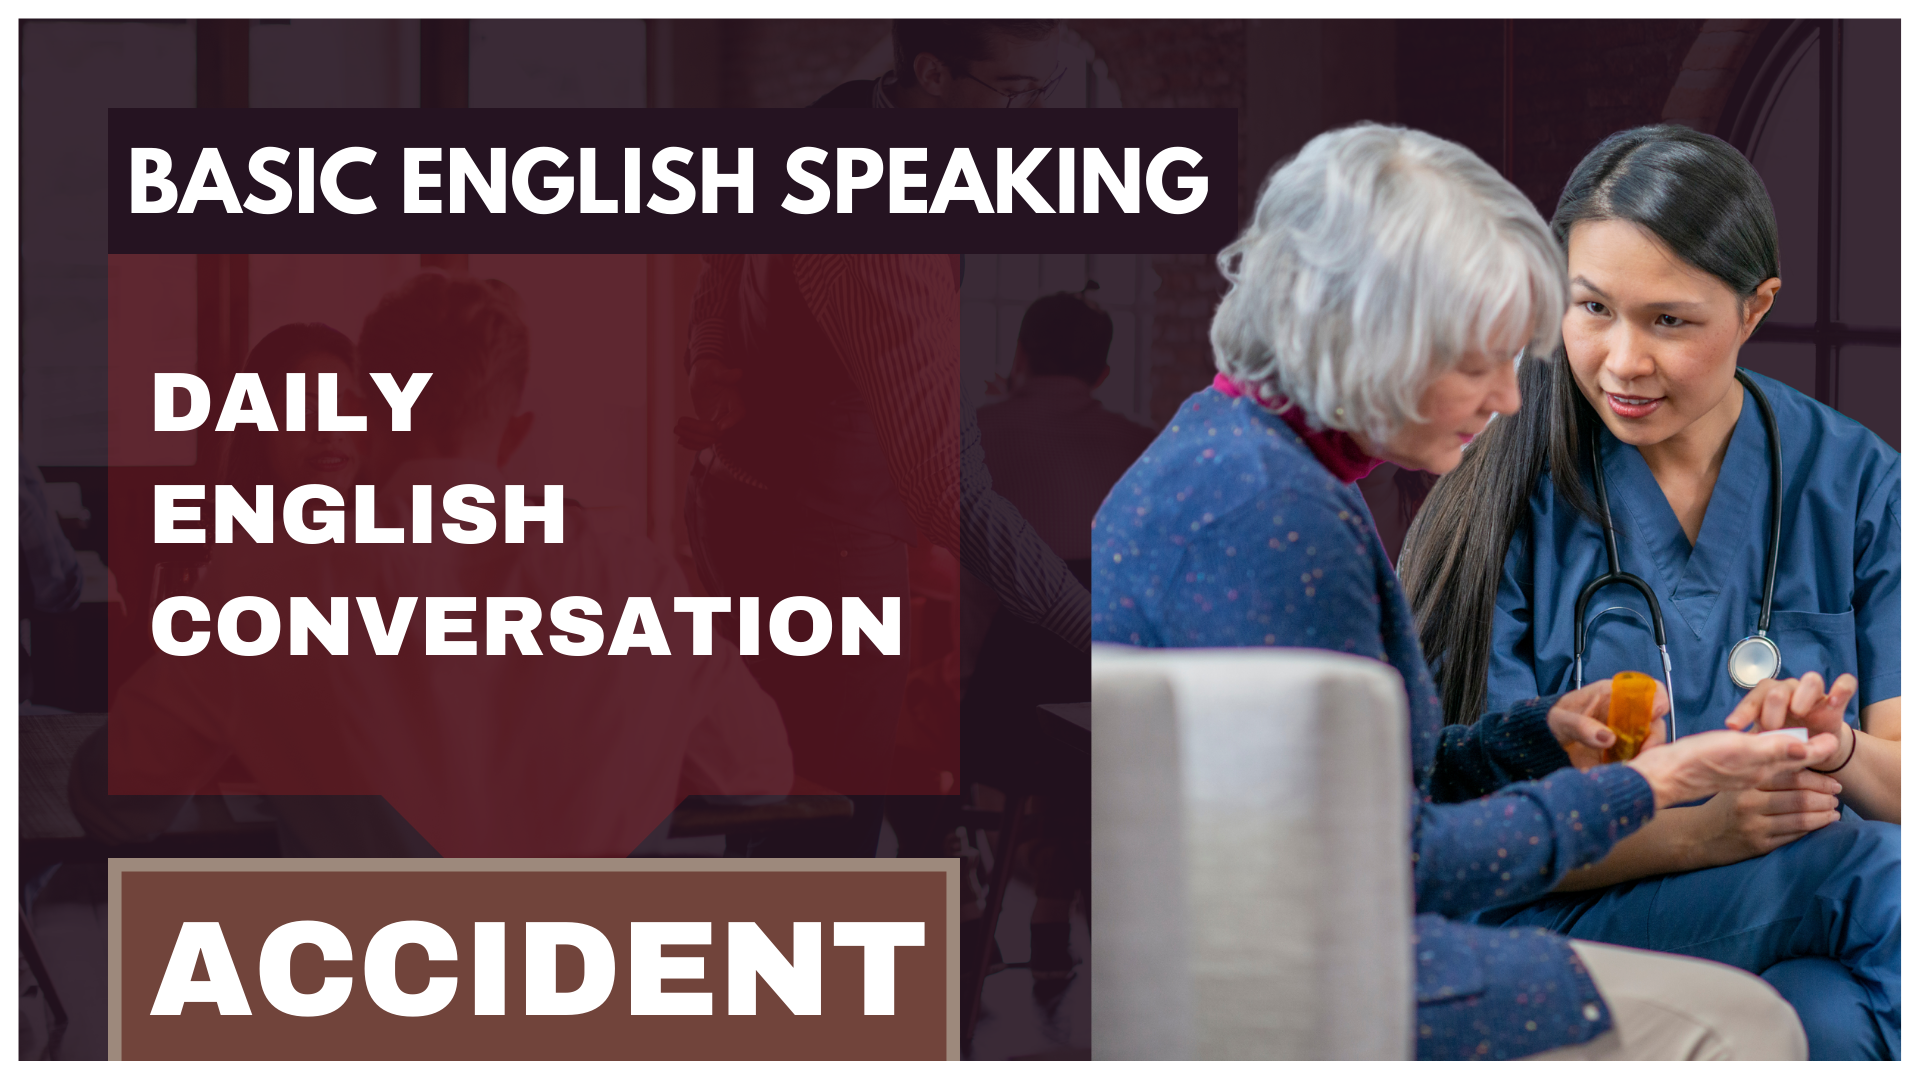 How to talk about accident - daily english conversation - basic english speaking